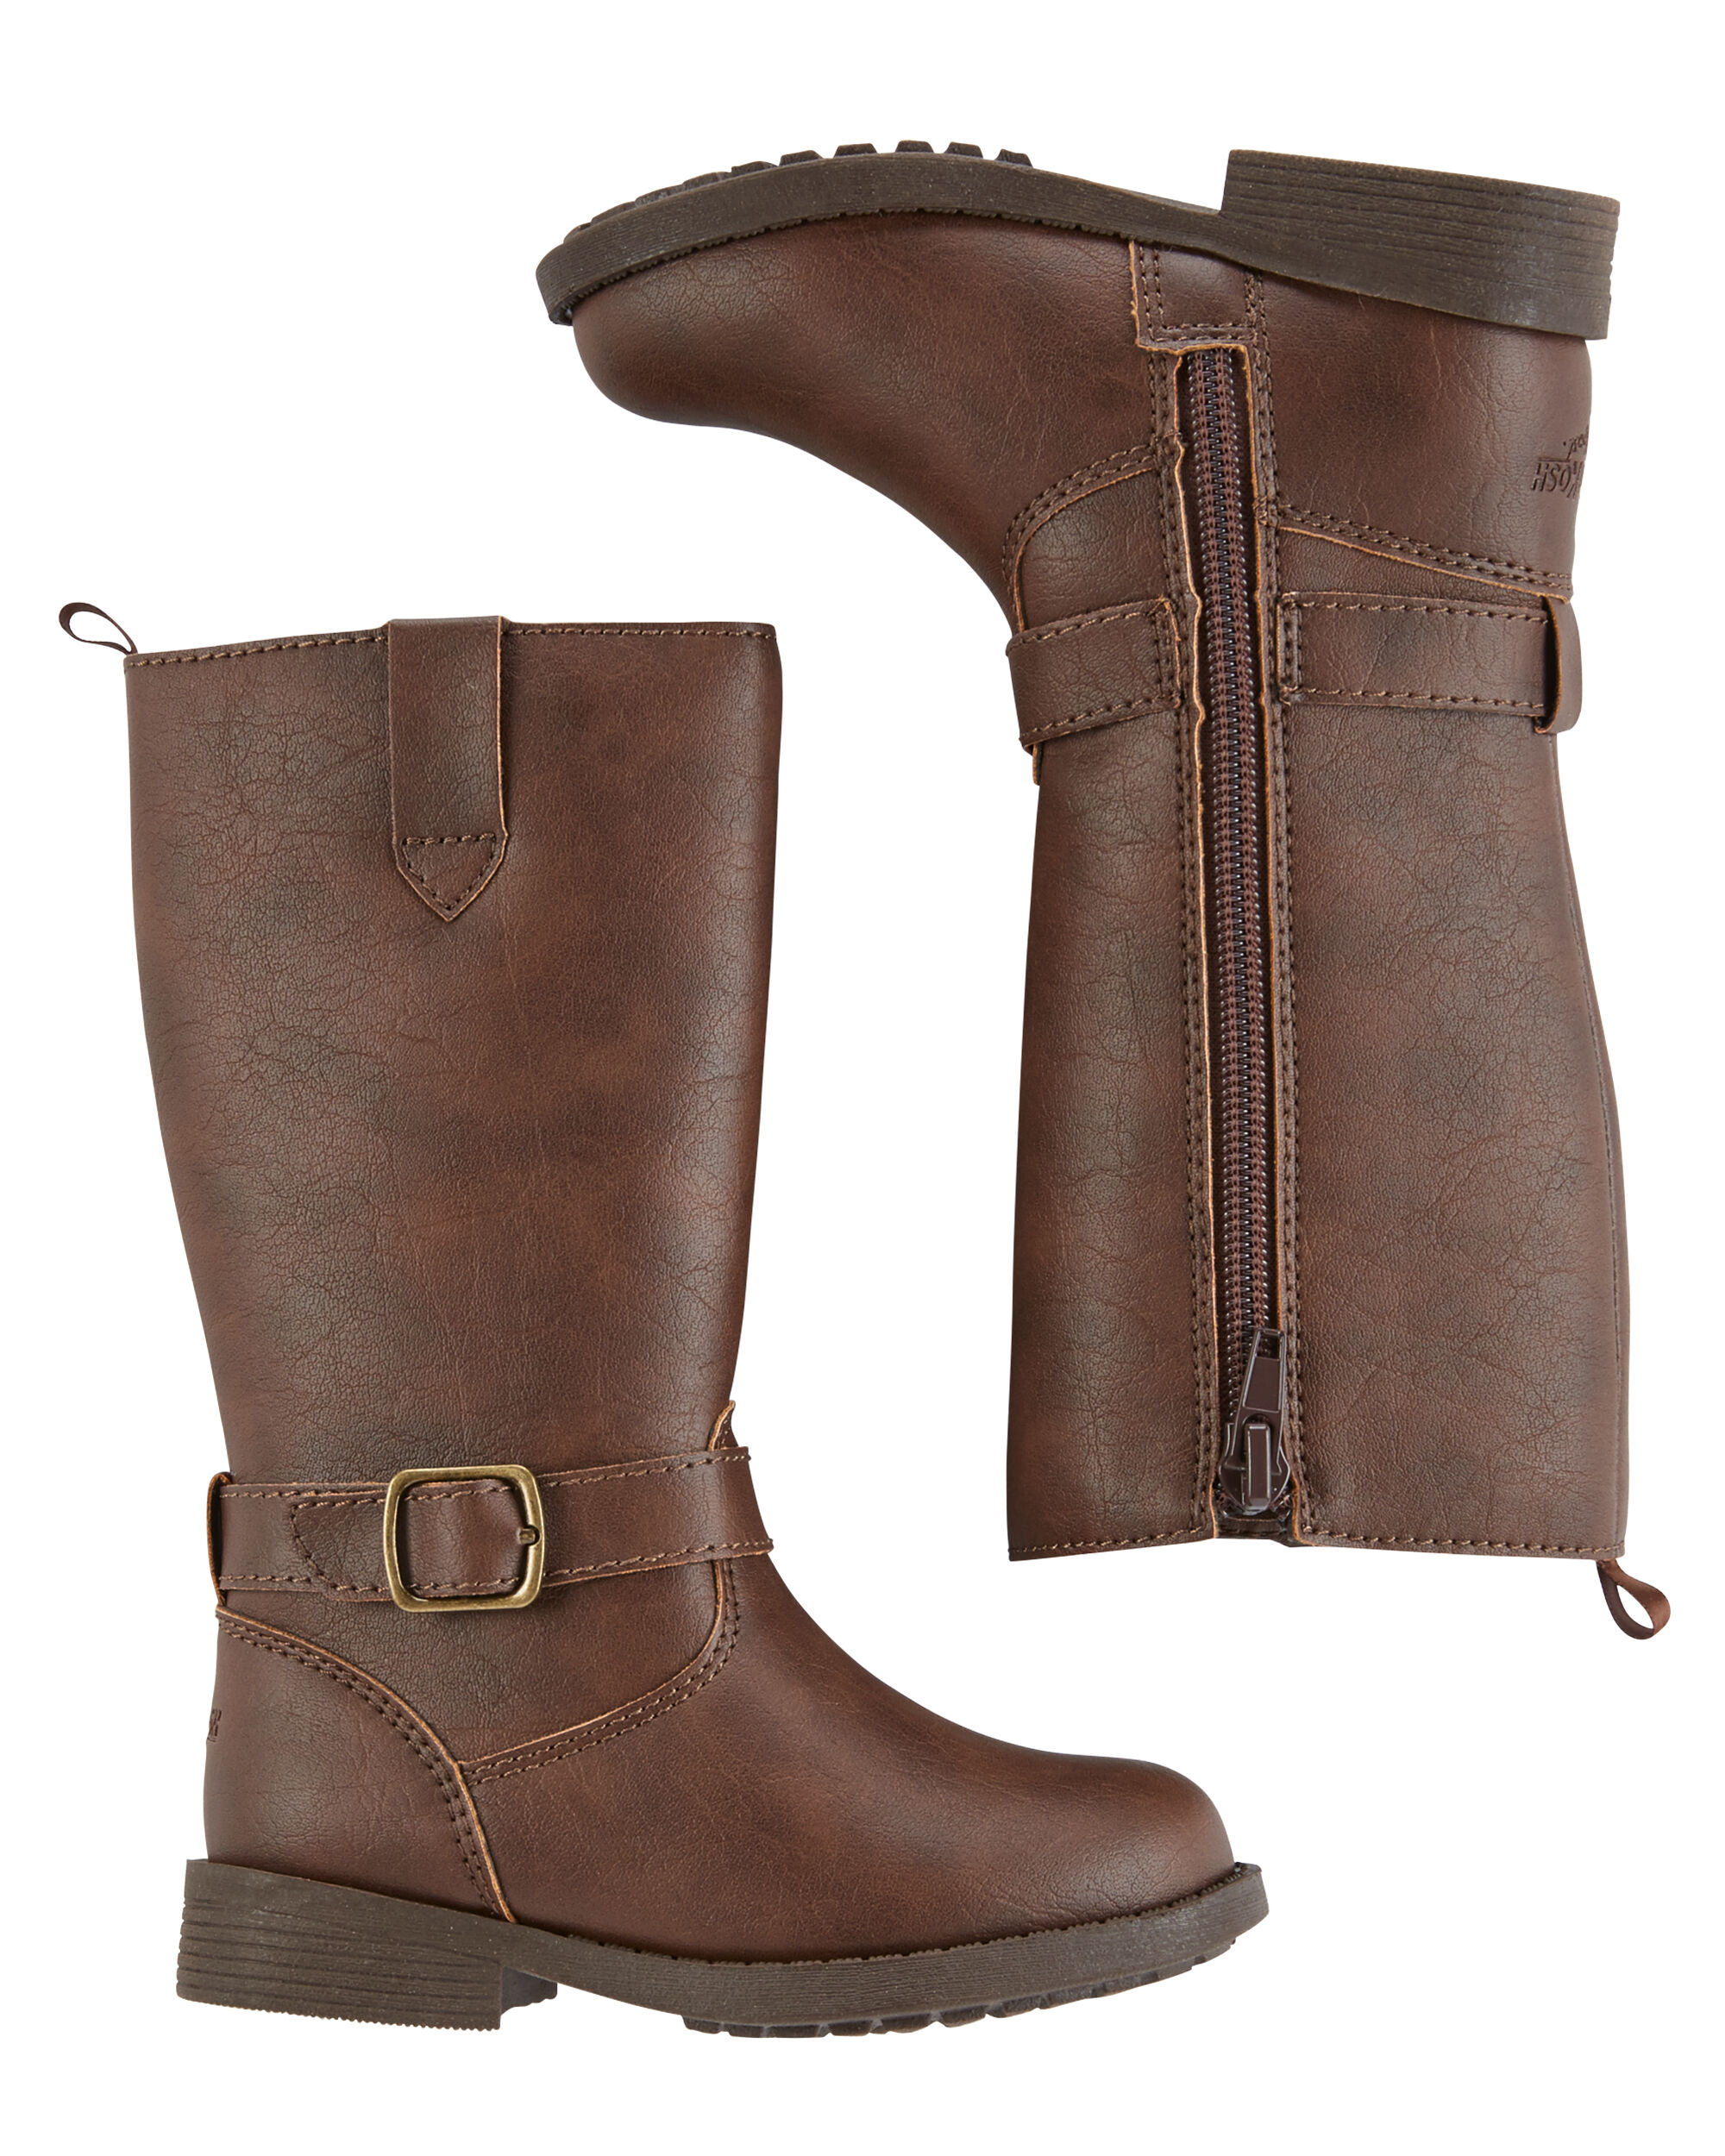 carter's buckle boots